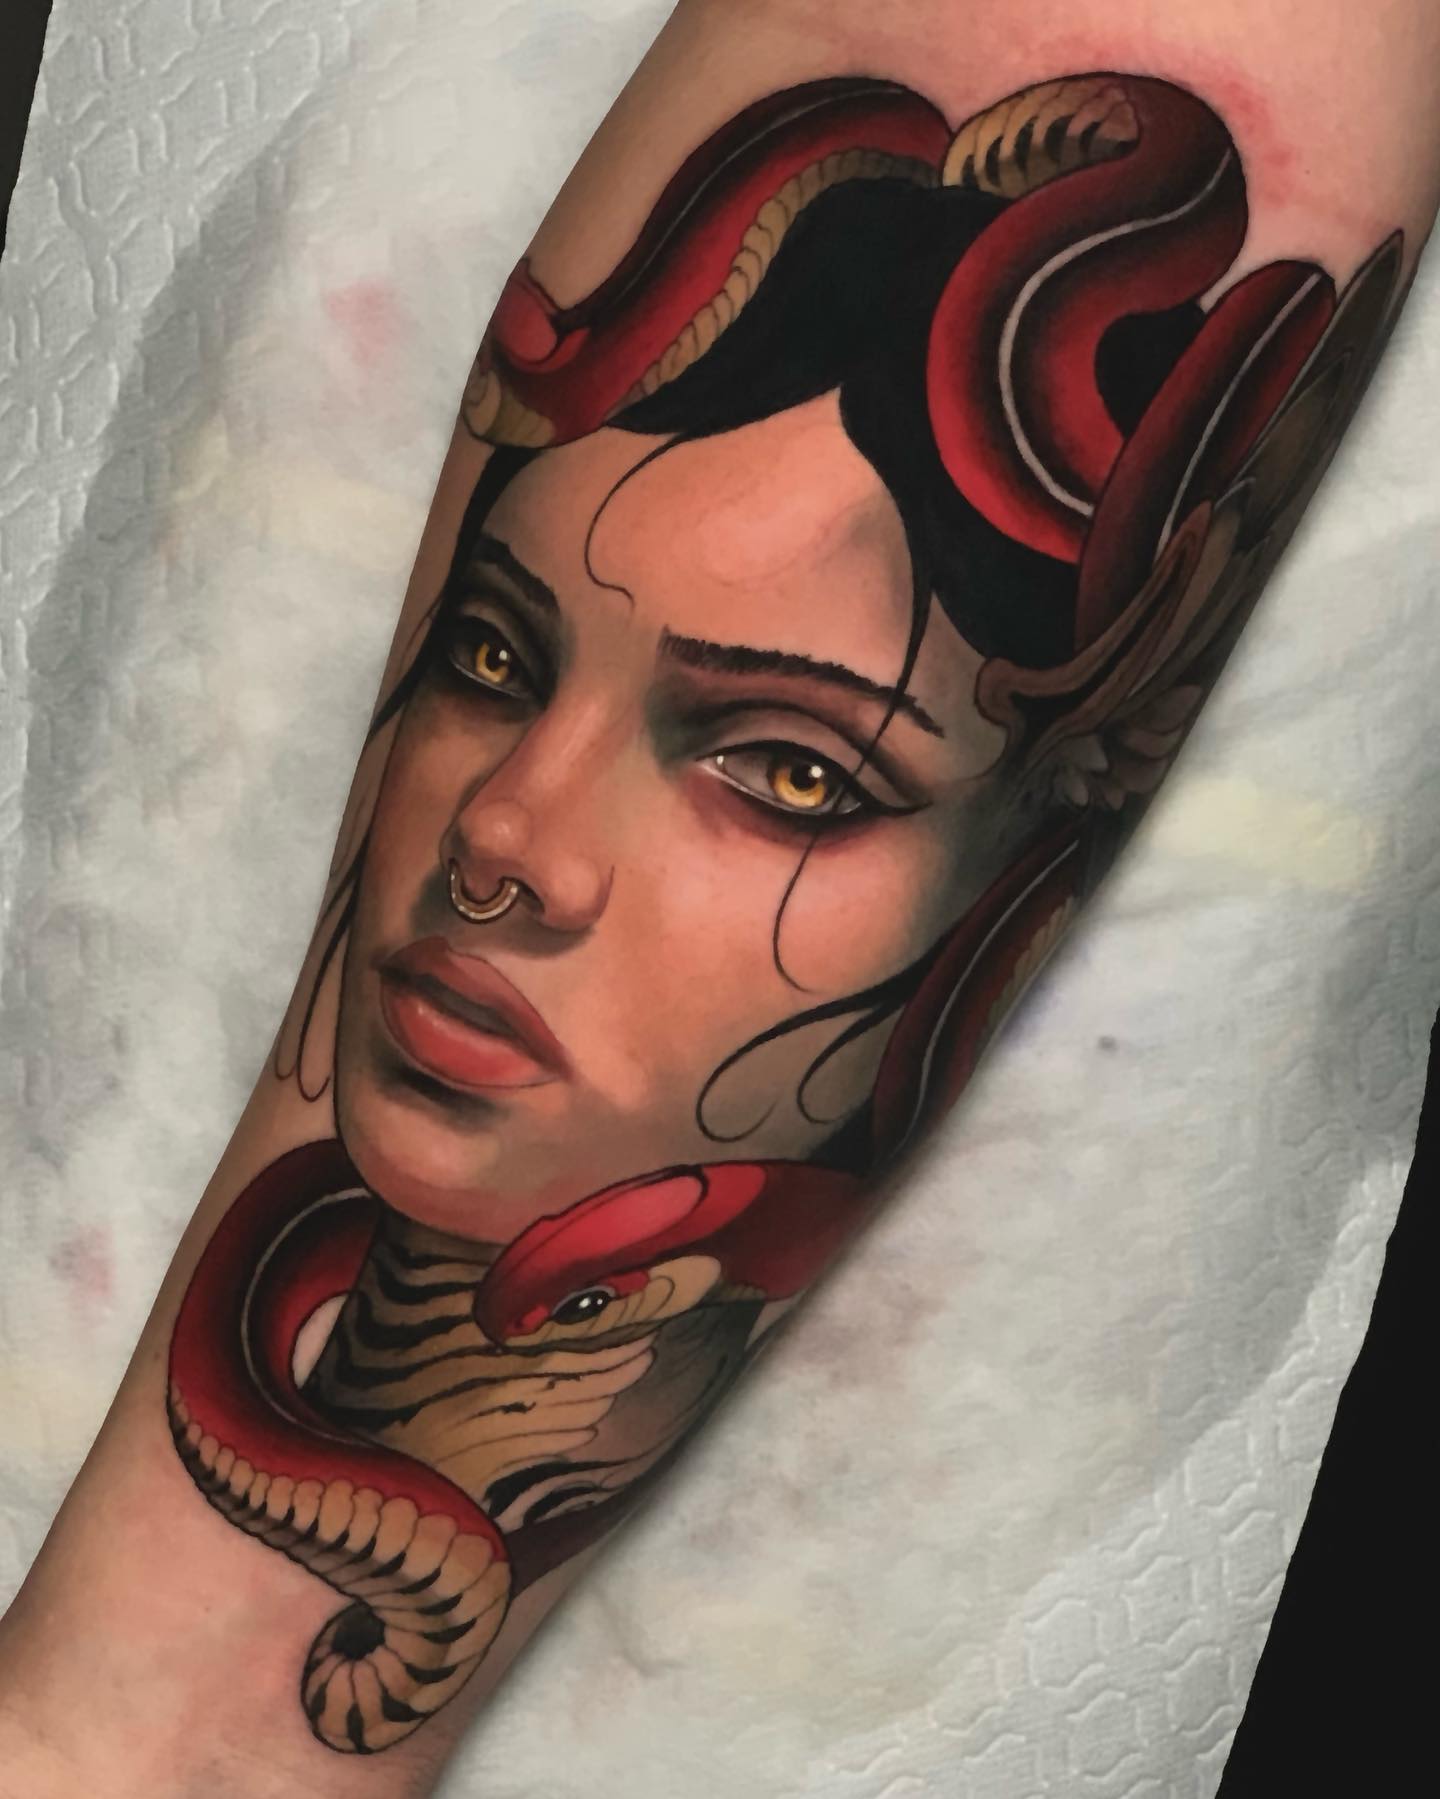 Can you spot the aesthetic details here? This is an example of a Neo-traditional tattoo which is known for its dense aesthetics. The colors look matching with each other in a great way.